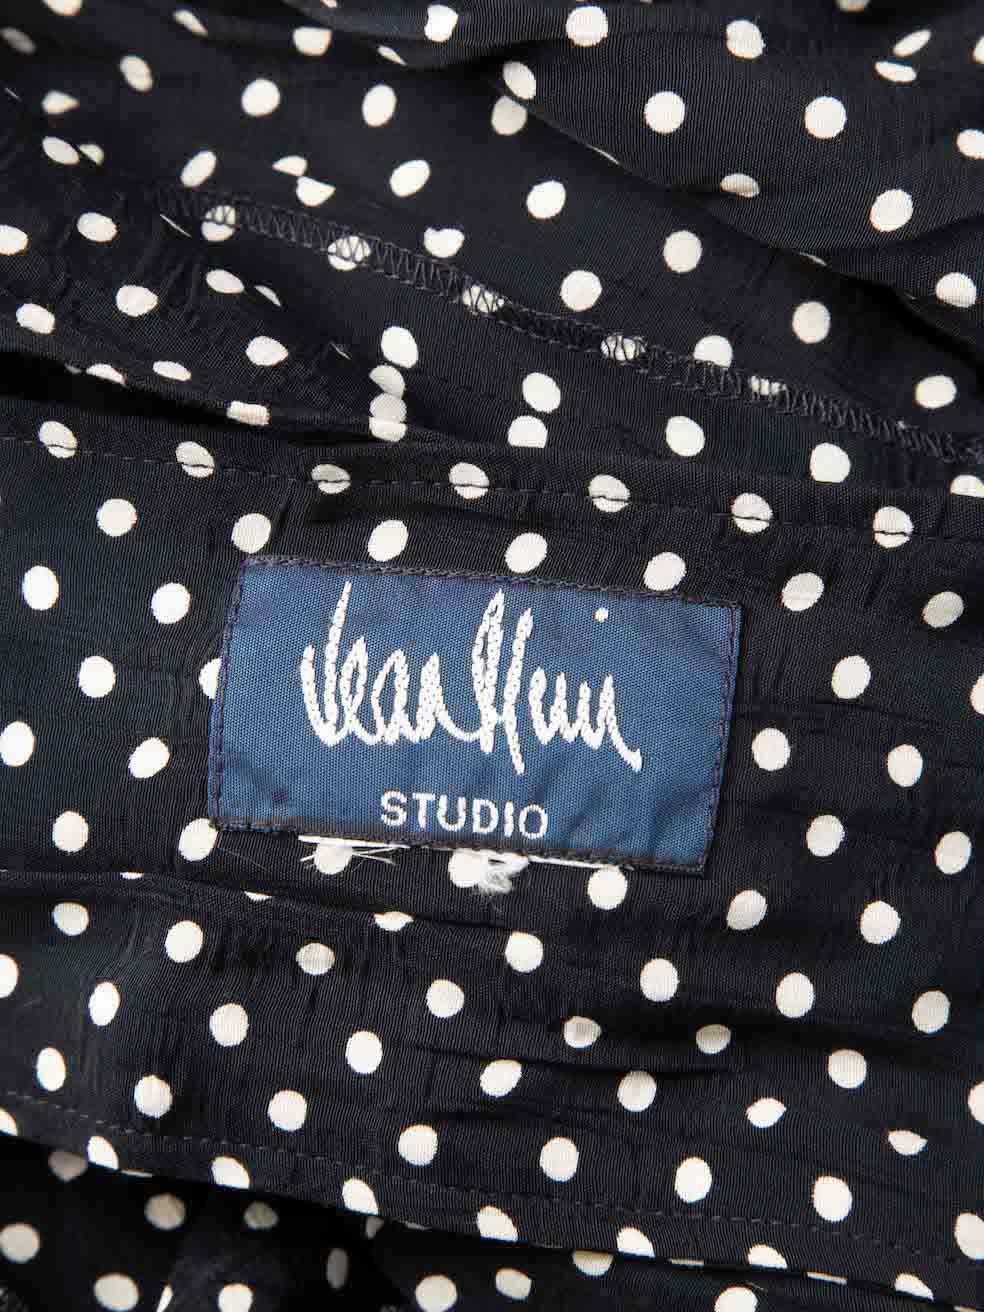 Jean Muir Navy Polka Dot With Bow Shirt Size M 2